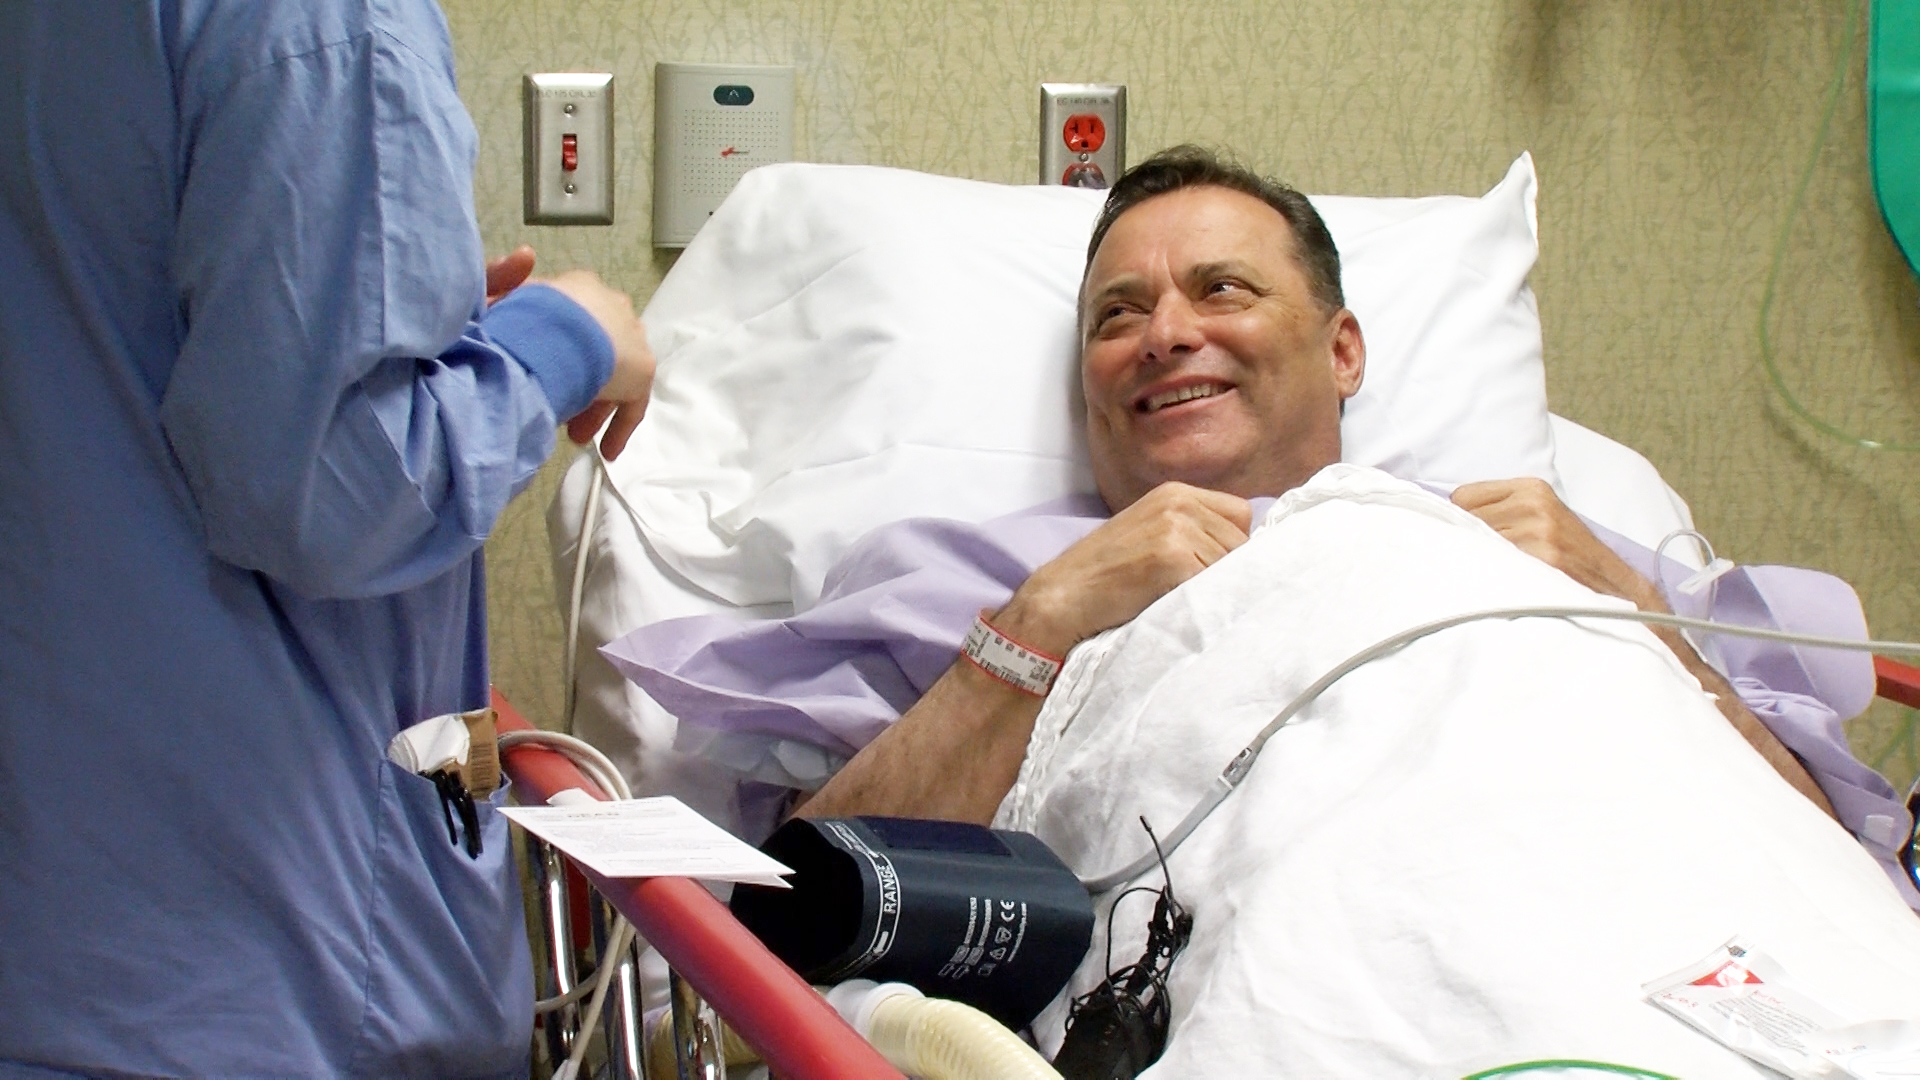 Former Texas A&M, Kentucky coach Billy Gillispie after receiving new  kidney: 'He (God) delivered my angel in my biggest time of need'